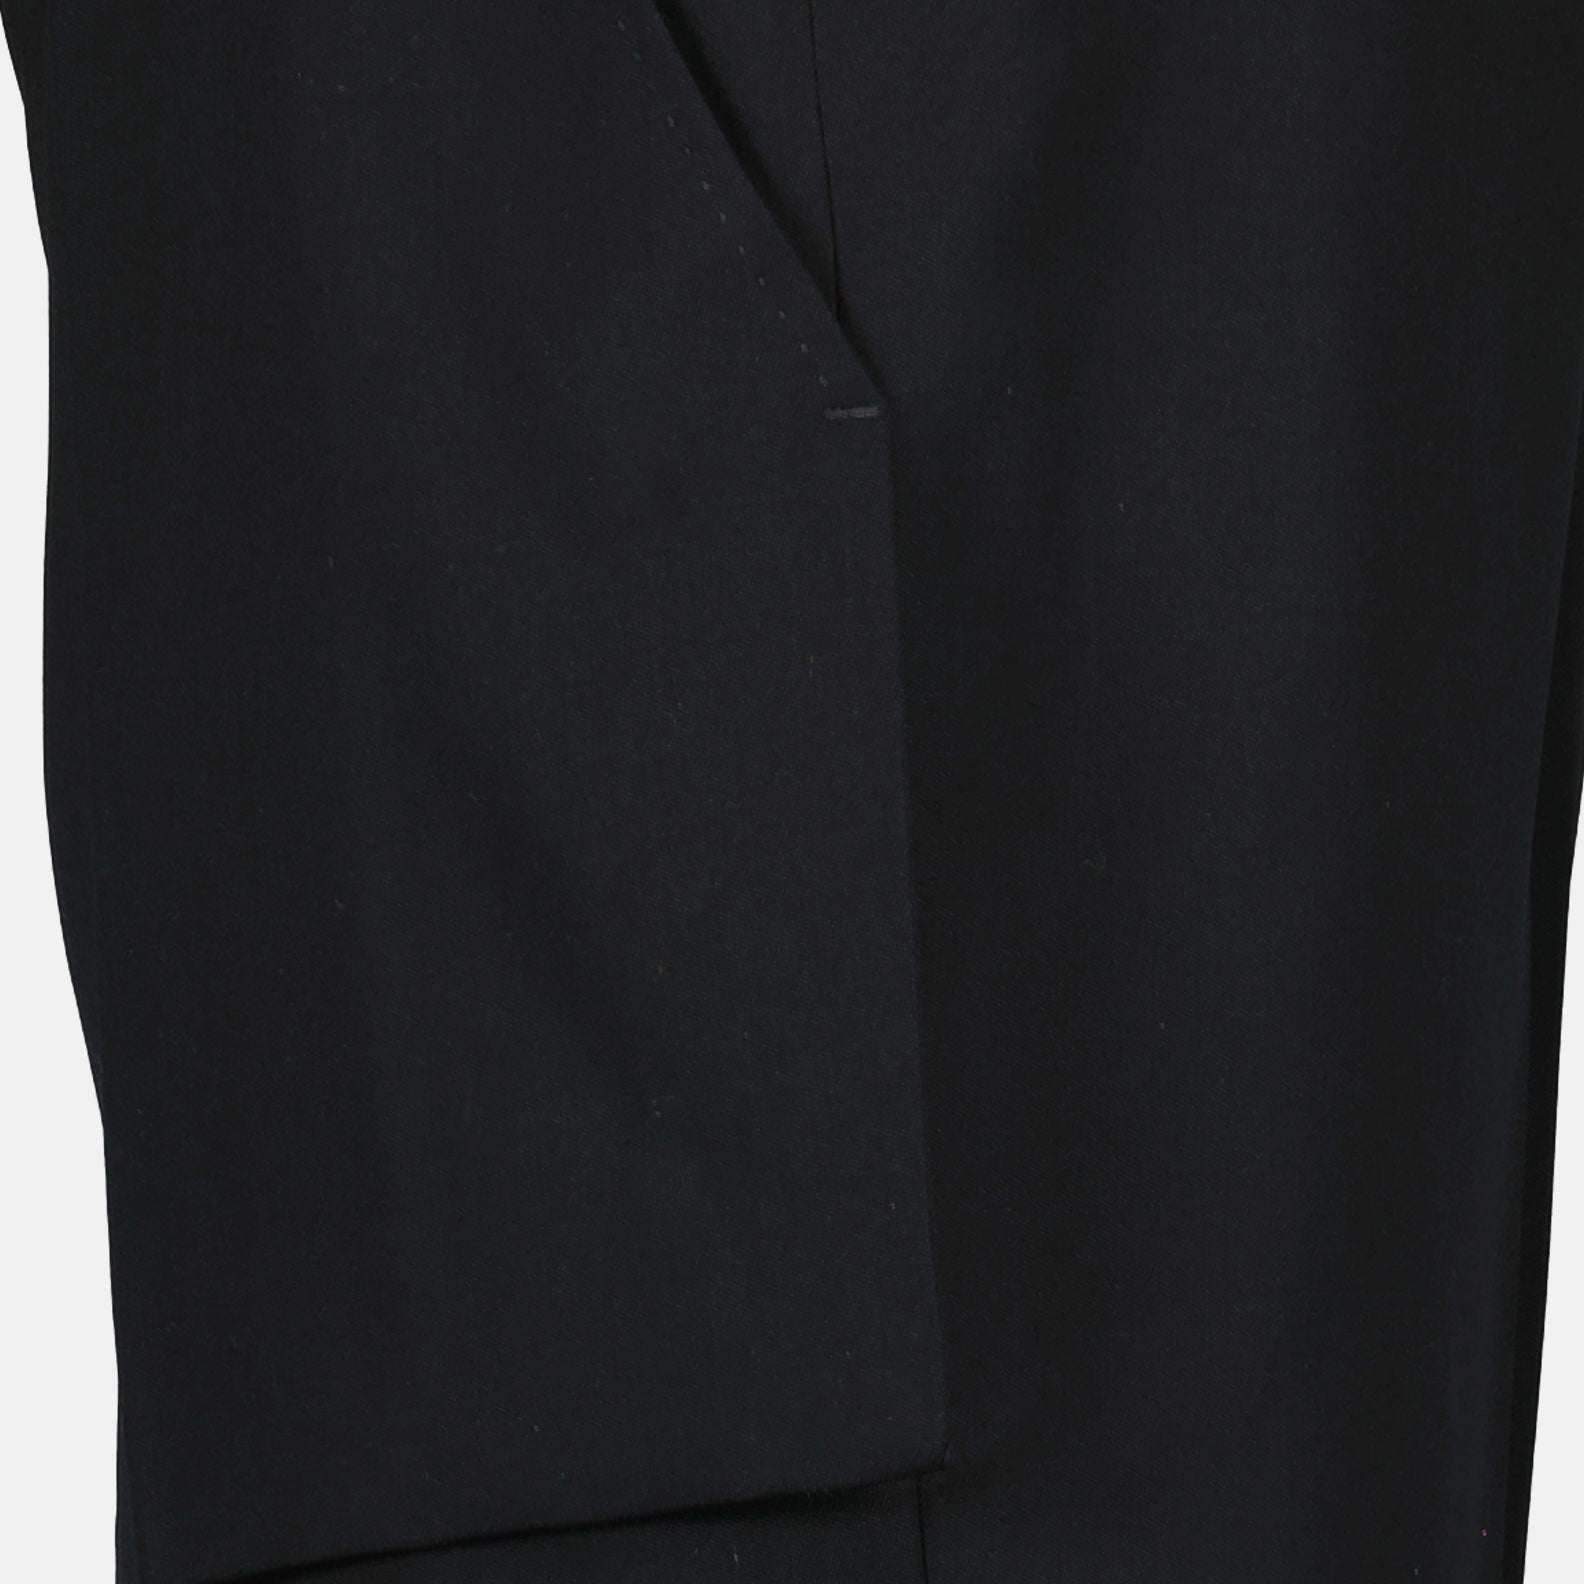 Trousers with visible pockets